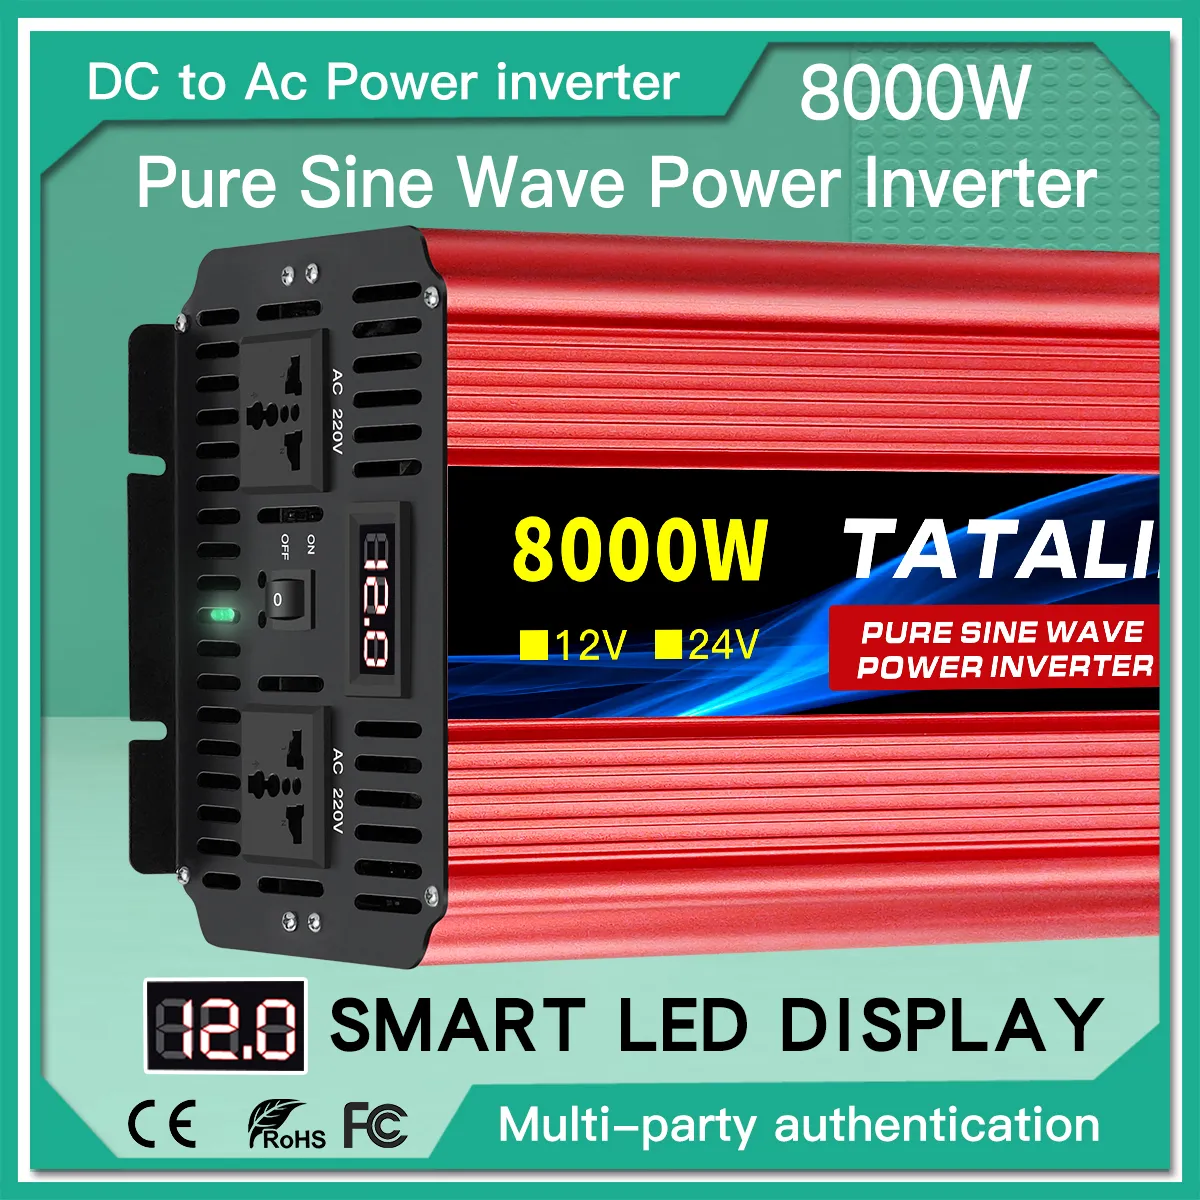 Pure Sine Wave Power Inverter 2500w/3500w/4500w/5000w/6000w dc 12v LED display is suitable for ac 220v solar converter car